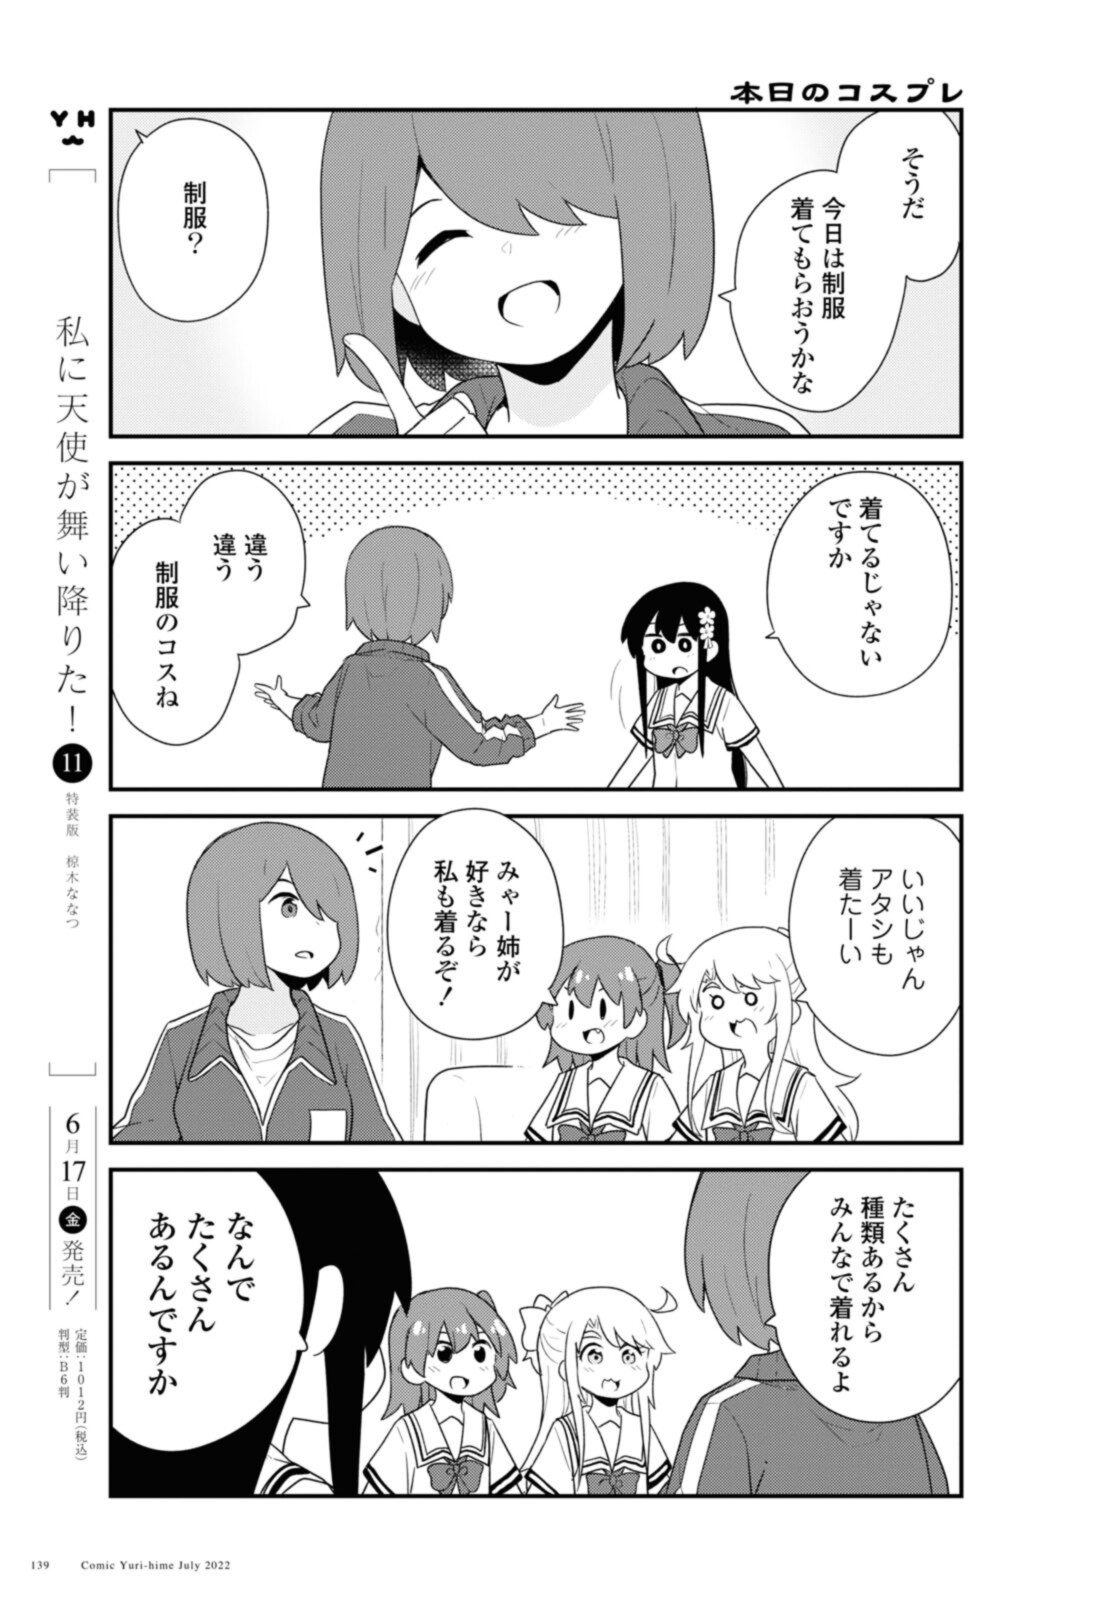 Wataten! An Angel Flew Down to Me 私に天使が舞い降りた！ 第97話 - Page 5